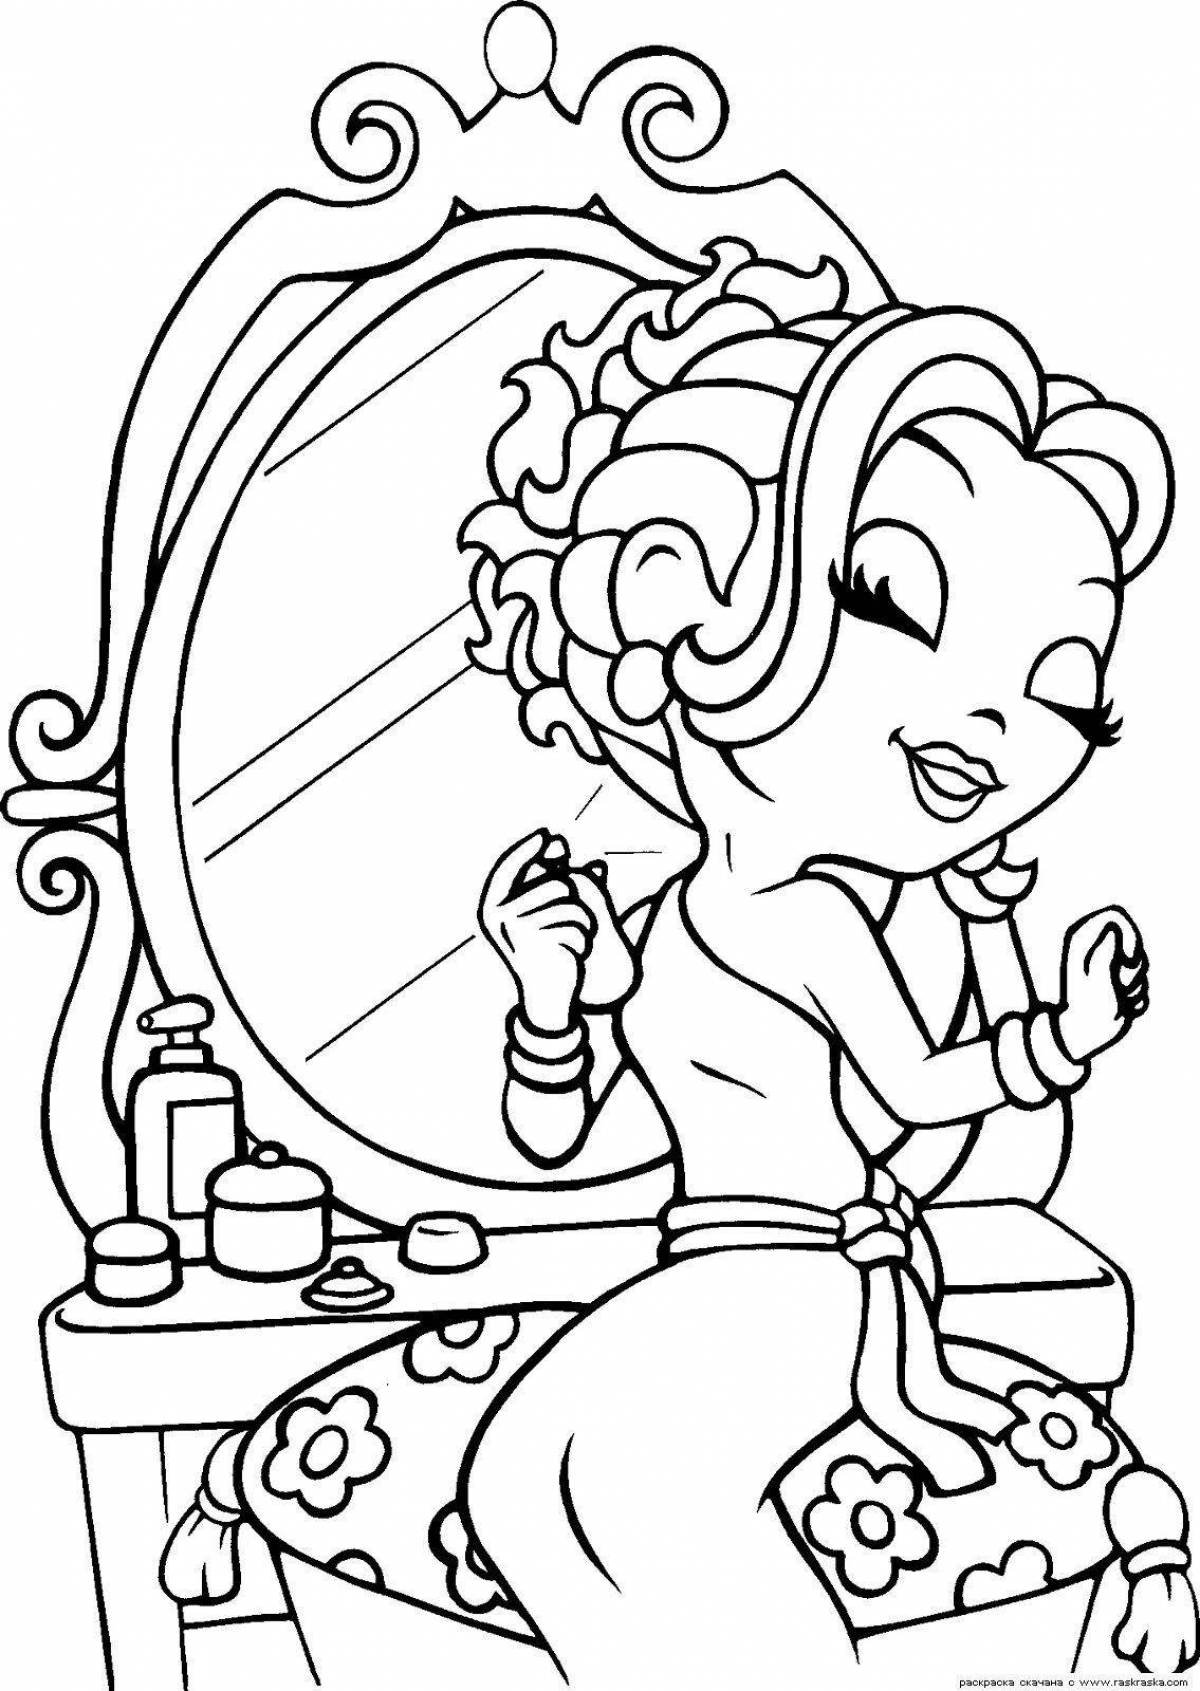 Luminous coloring book for girls 7-8 years old